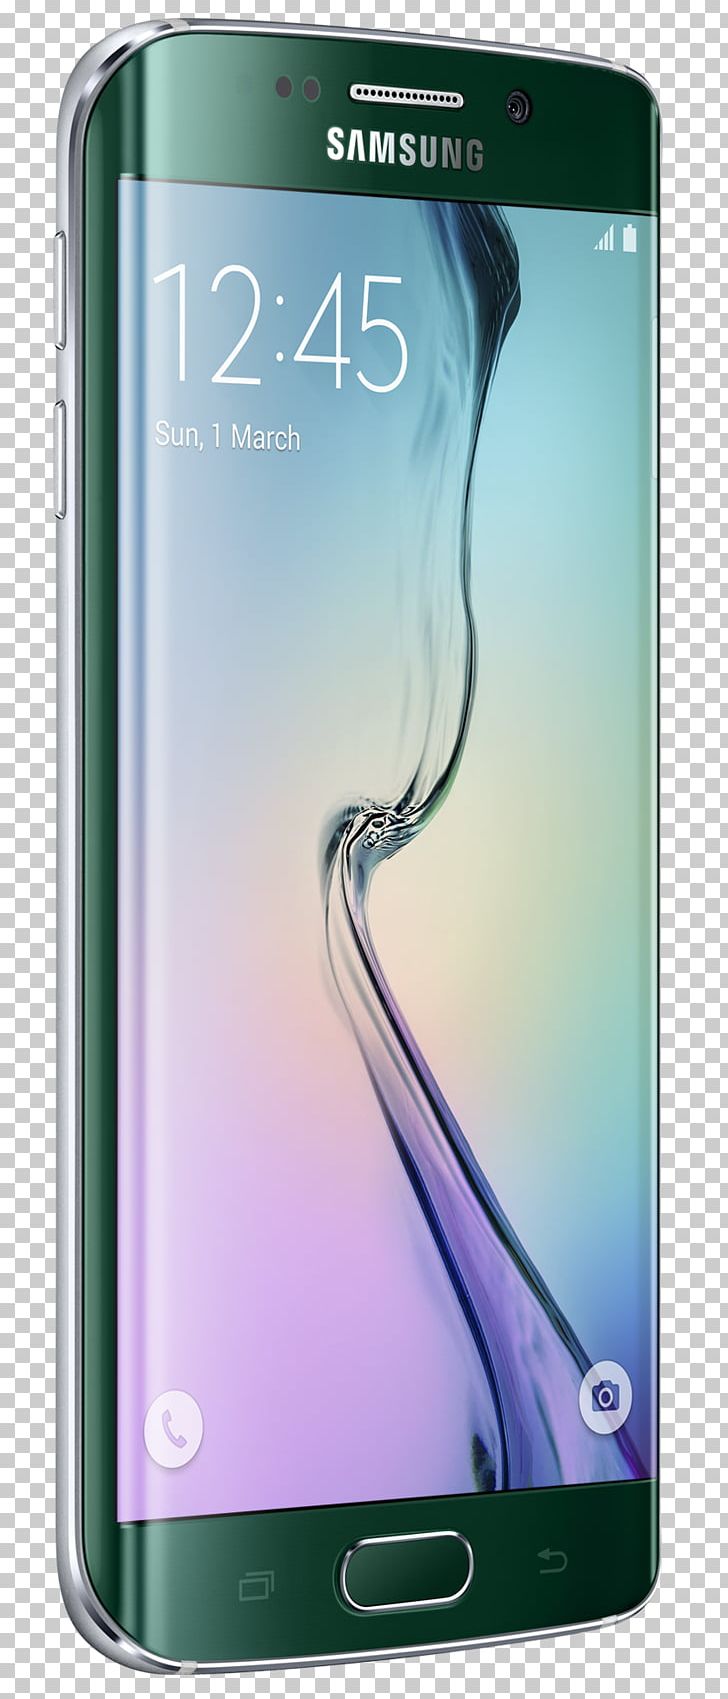 Samsung Galaxy Note Edge Samsung Galaxy Note 5 Samsung Galaxy S7 Android PNG, Clipart, Android, Electronic Device, Gadget, Lte, Mobile Phone Free PNG Download